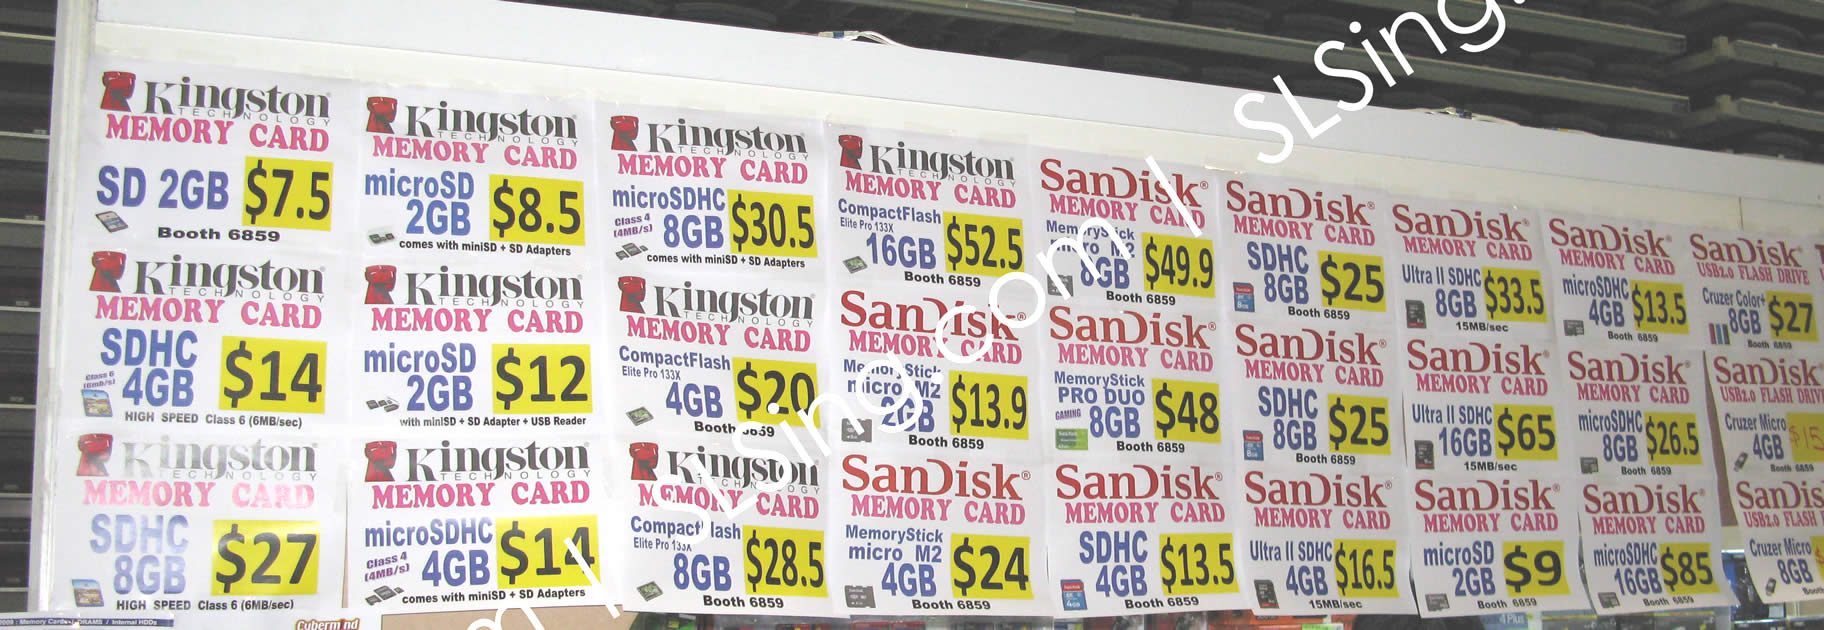 IT Show 2009 price list image brochure of Kingston Sandisk (vr-zone Booest)